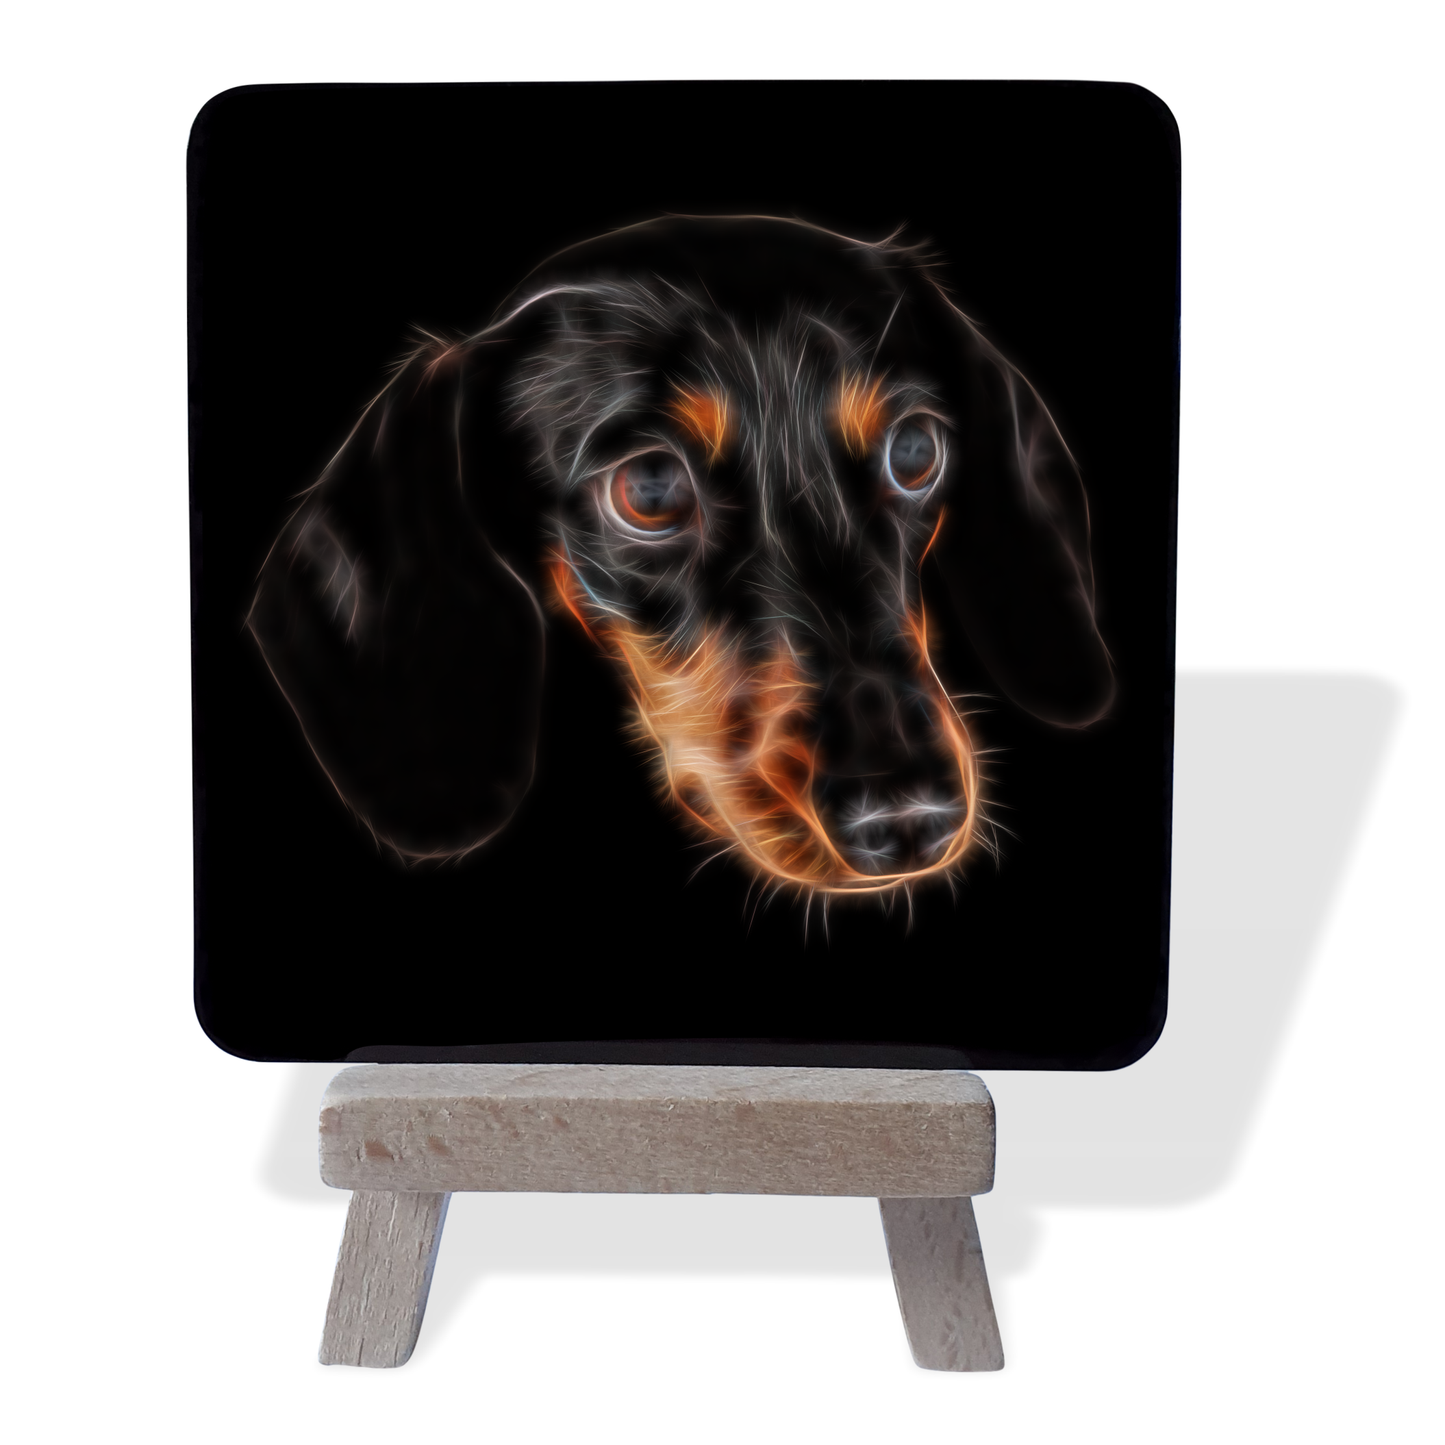 Black and Tan Dachshund #1 Metal Plaque and Mini Easel with Fractal Art Design